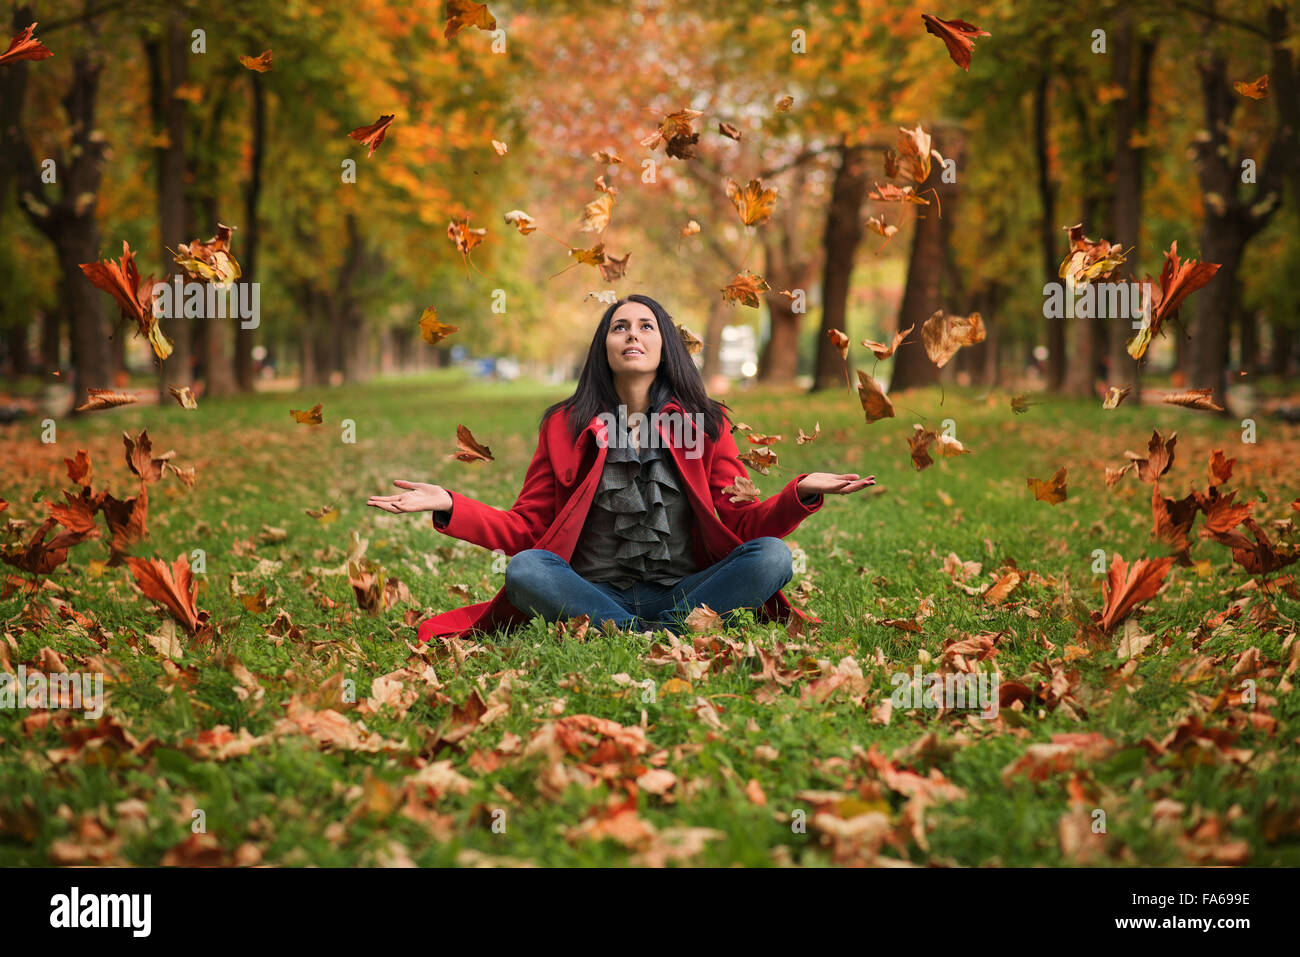 Woman sitting on grass throwing leaves in the air Stock Photo